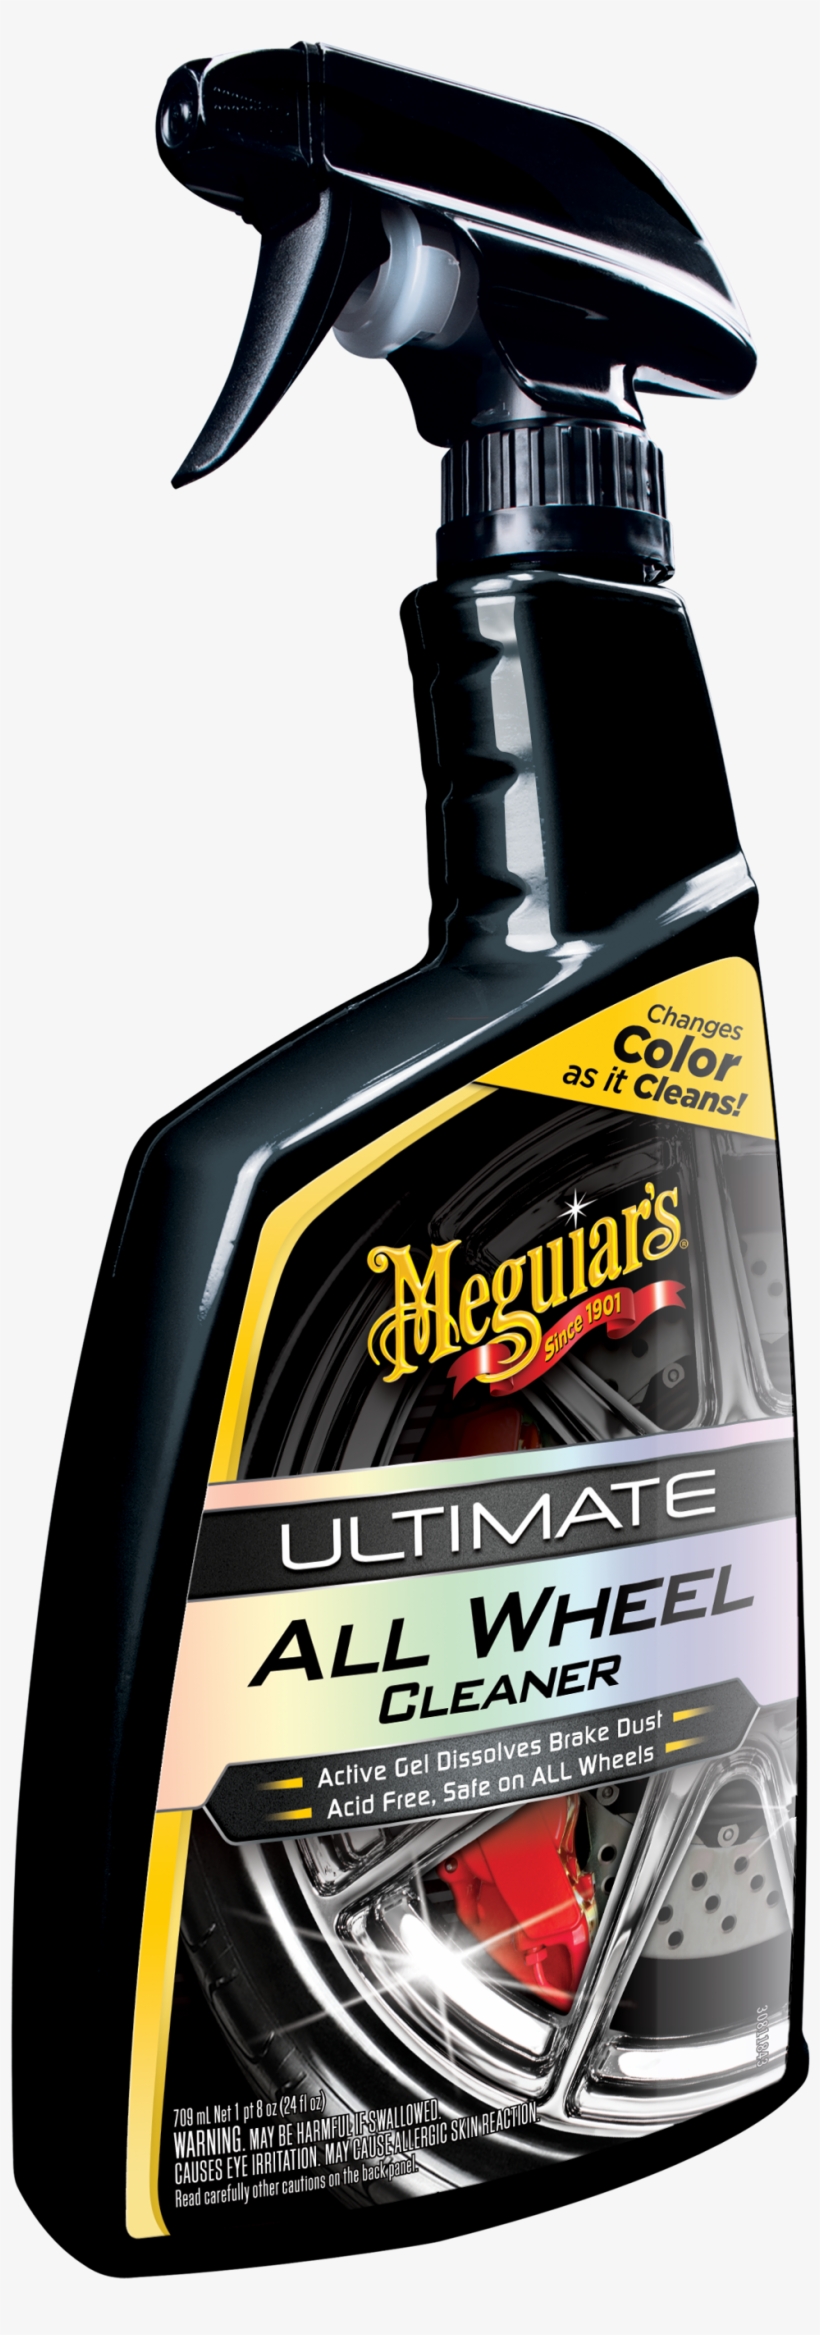 G180124 Ultimate All Wheel Cleaner - Meguiars Ultimate Wheel Cleaner, transparent png #3556523